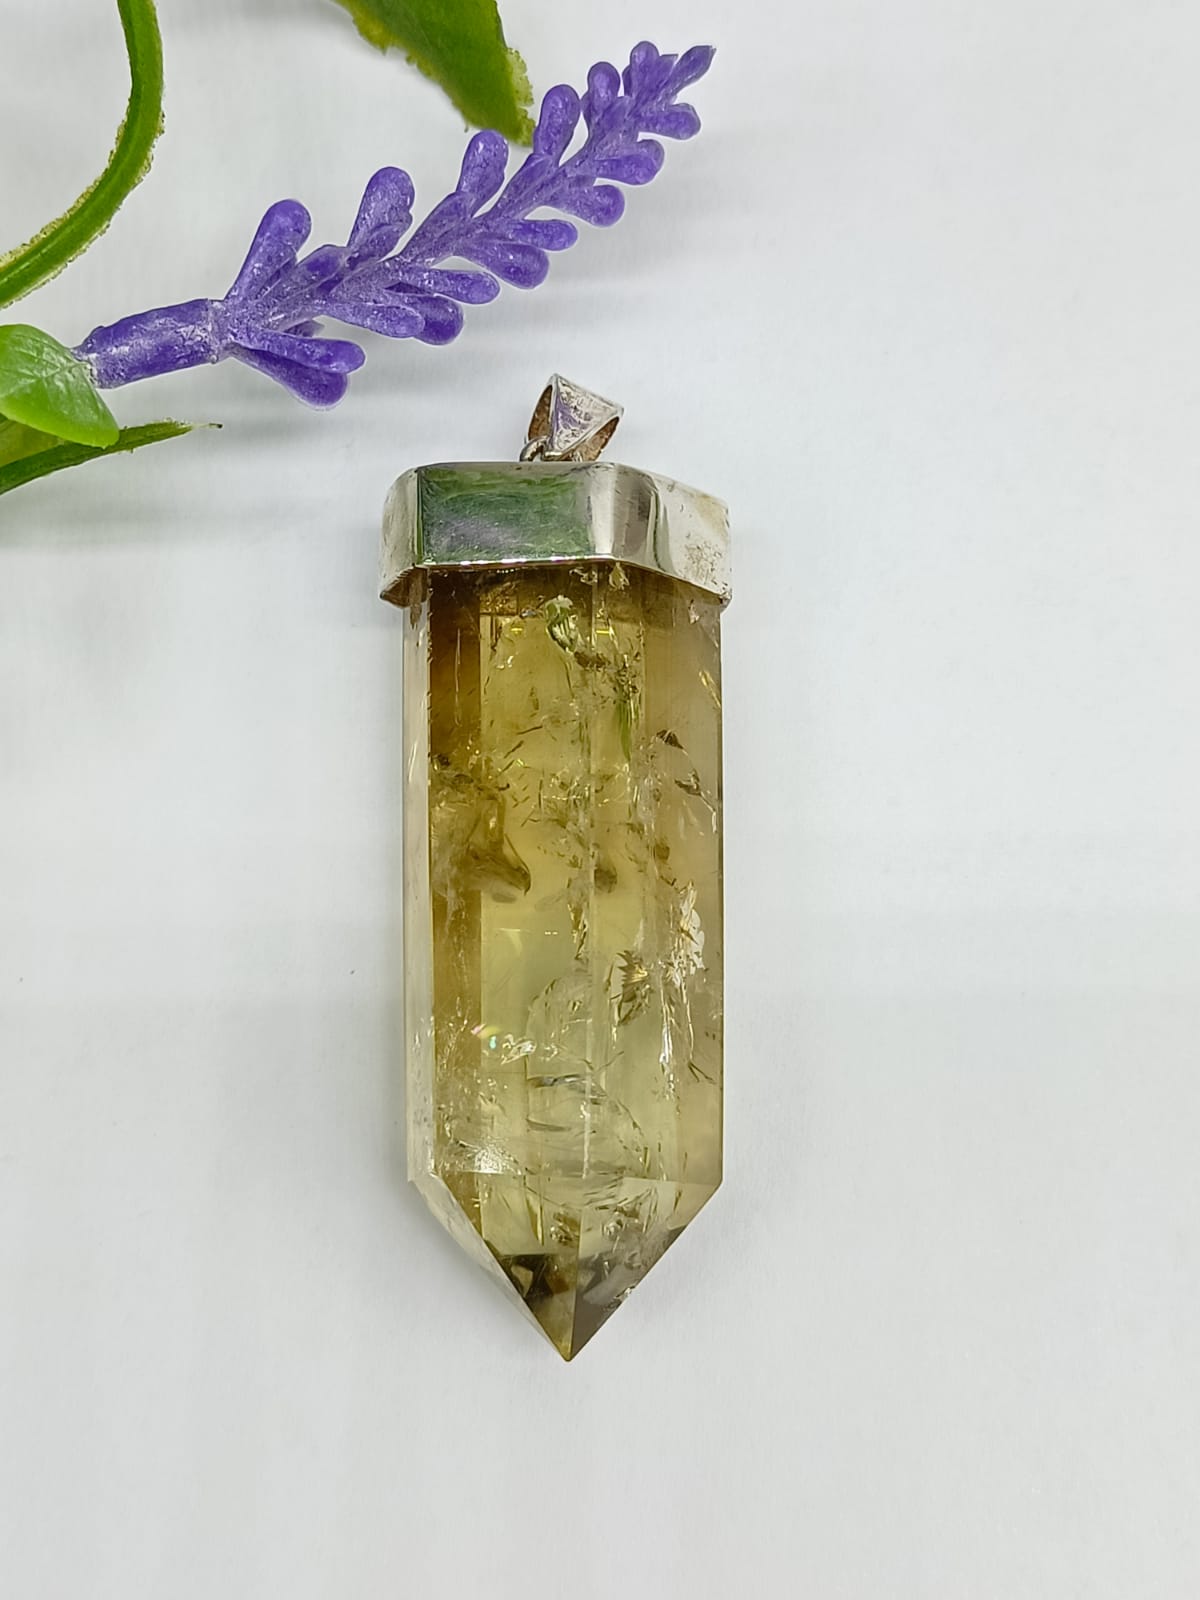 Genuine Natural Citrine 925 silver Large Pendant 51x18mm Crystal Wellness